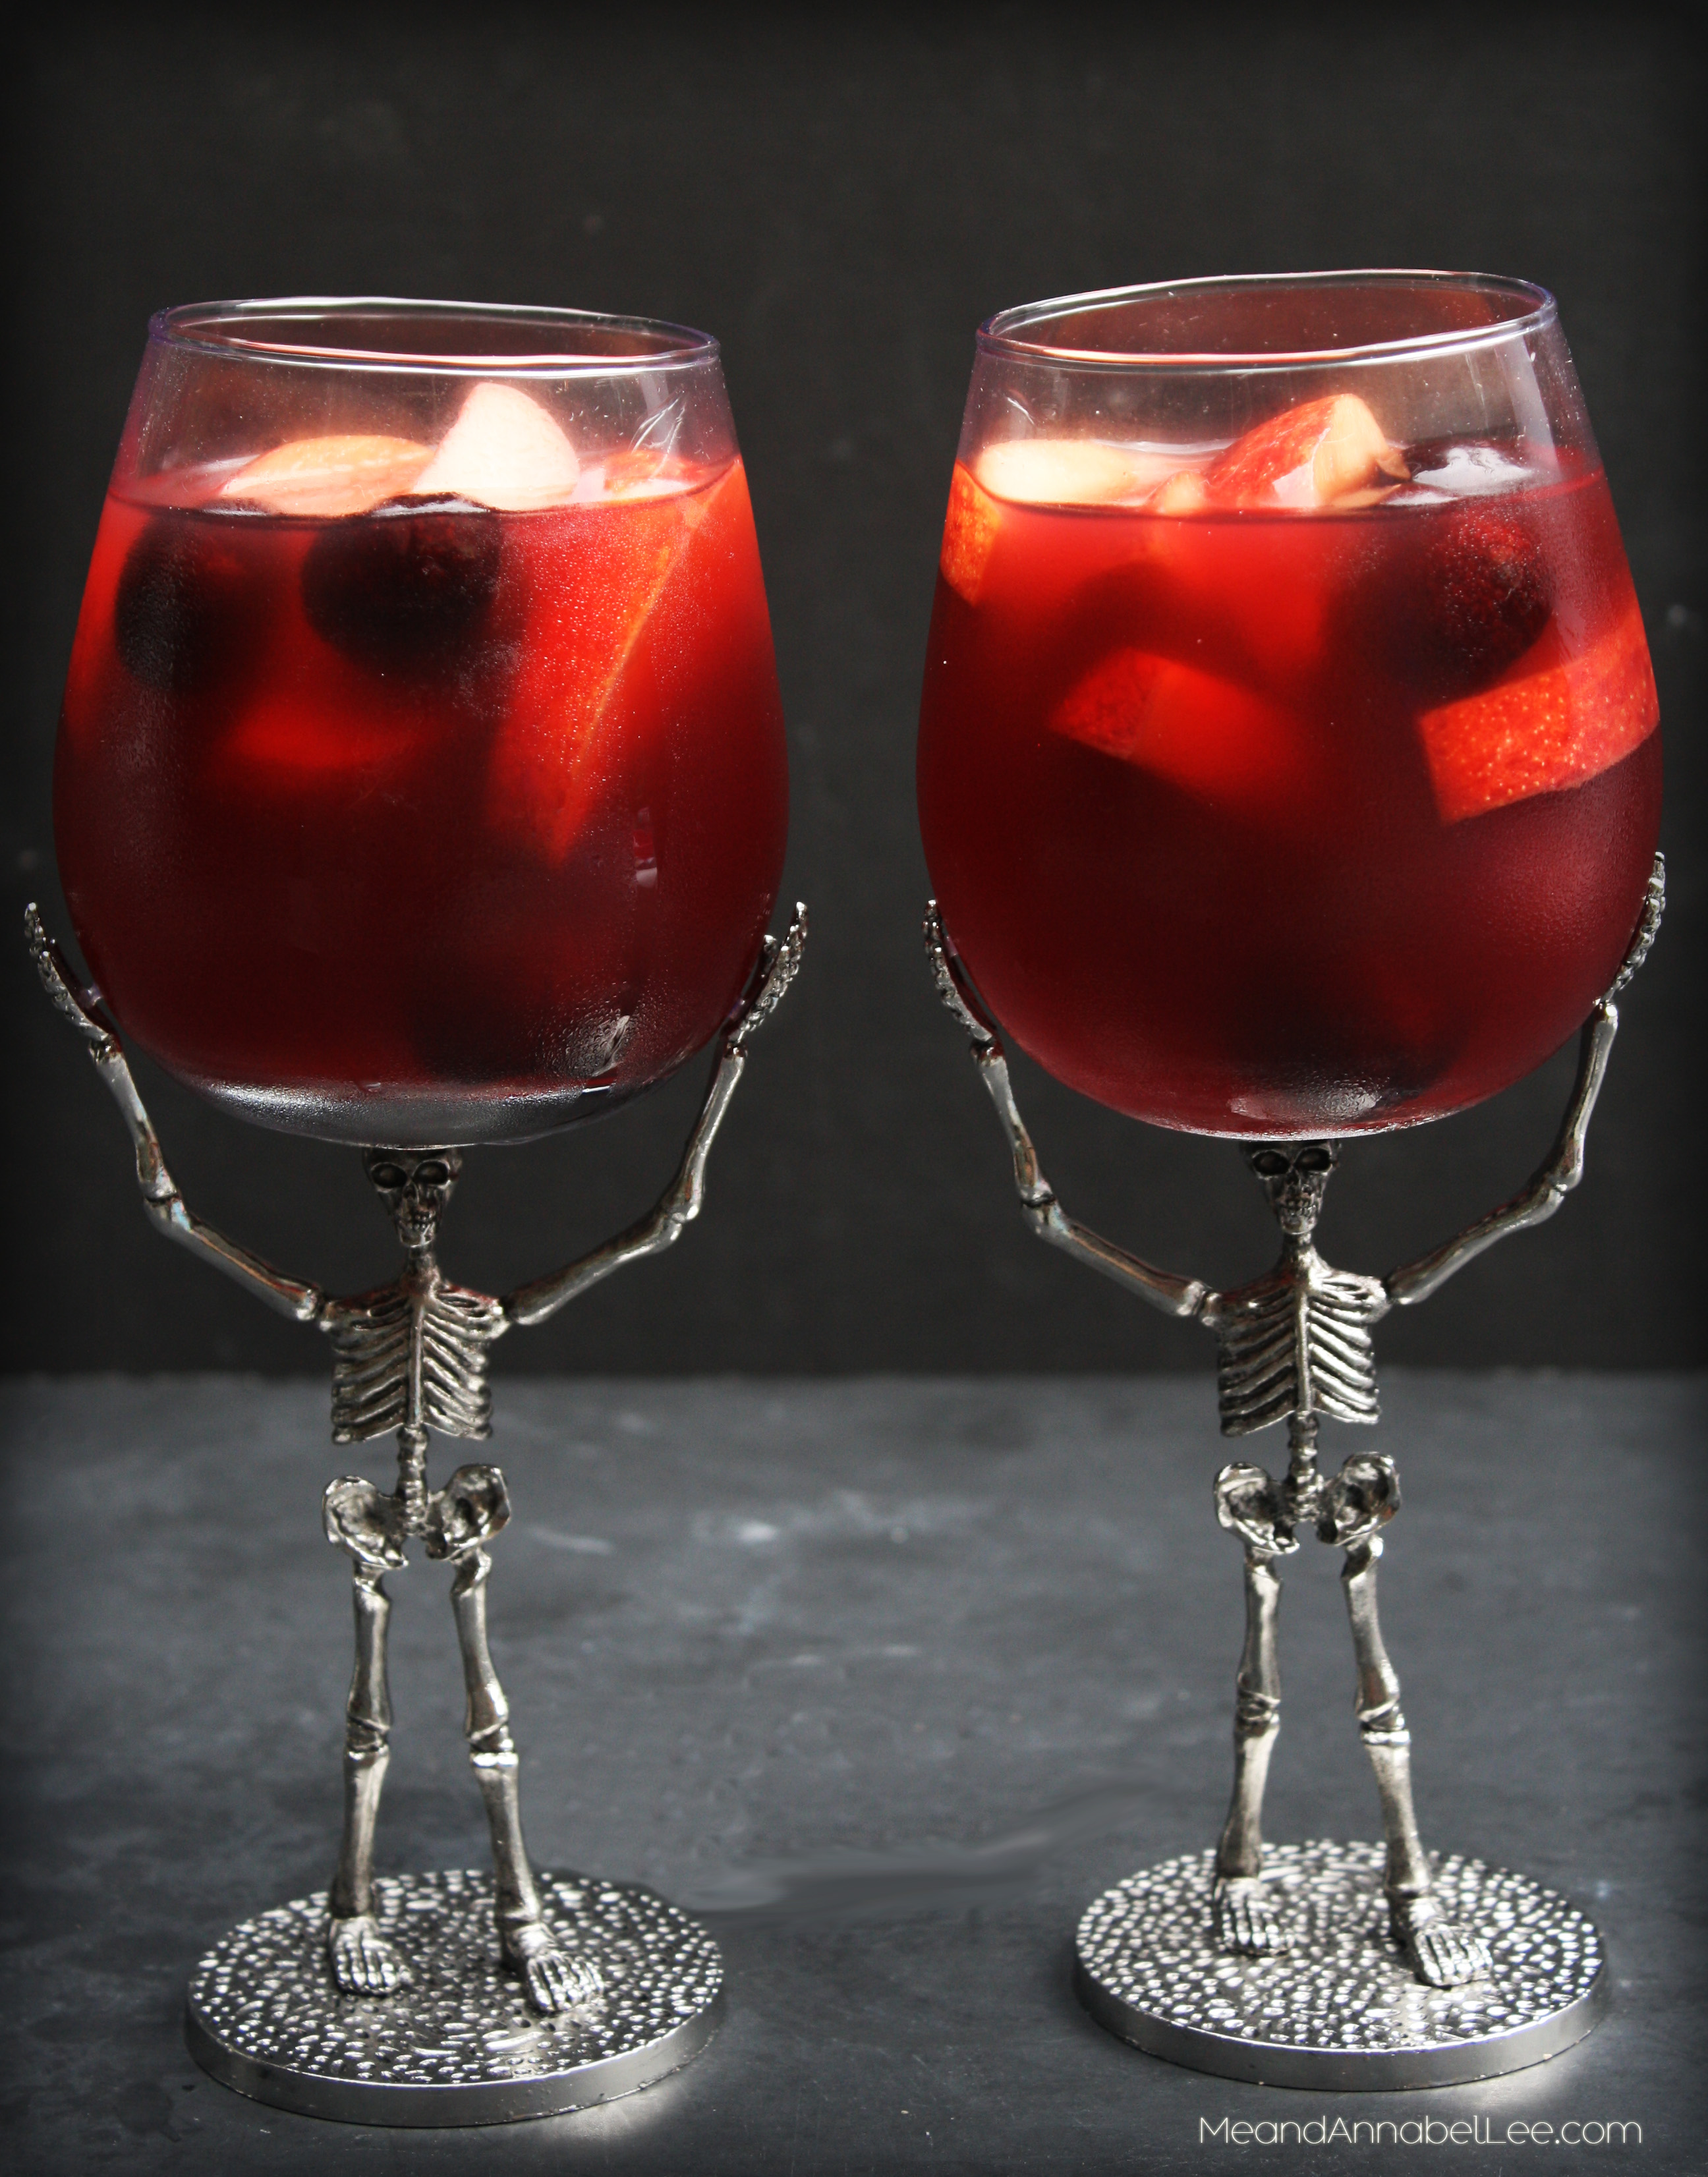 Apple Sangria....A mix of Envy Apples, Cinnamon, and Cherries make up this Fall inspired cocktail.... perfect for Halloween, Thanksgiving, or a Fall Party! - www.MeandAnnabelLee.com